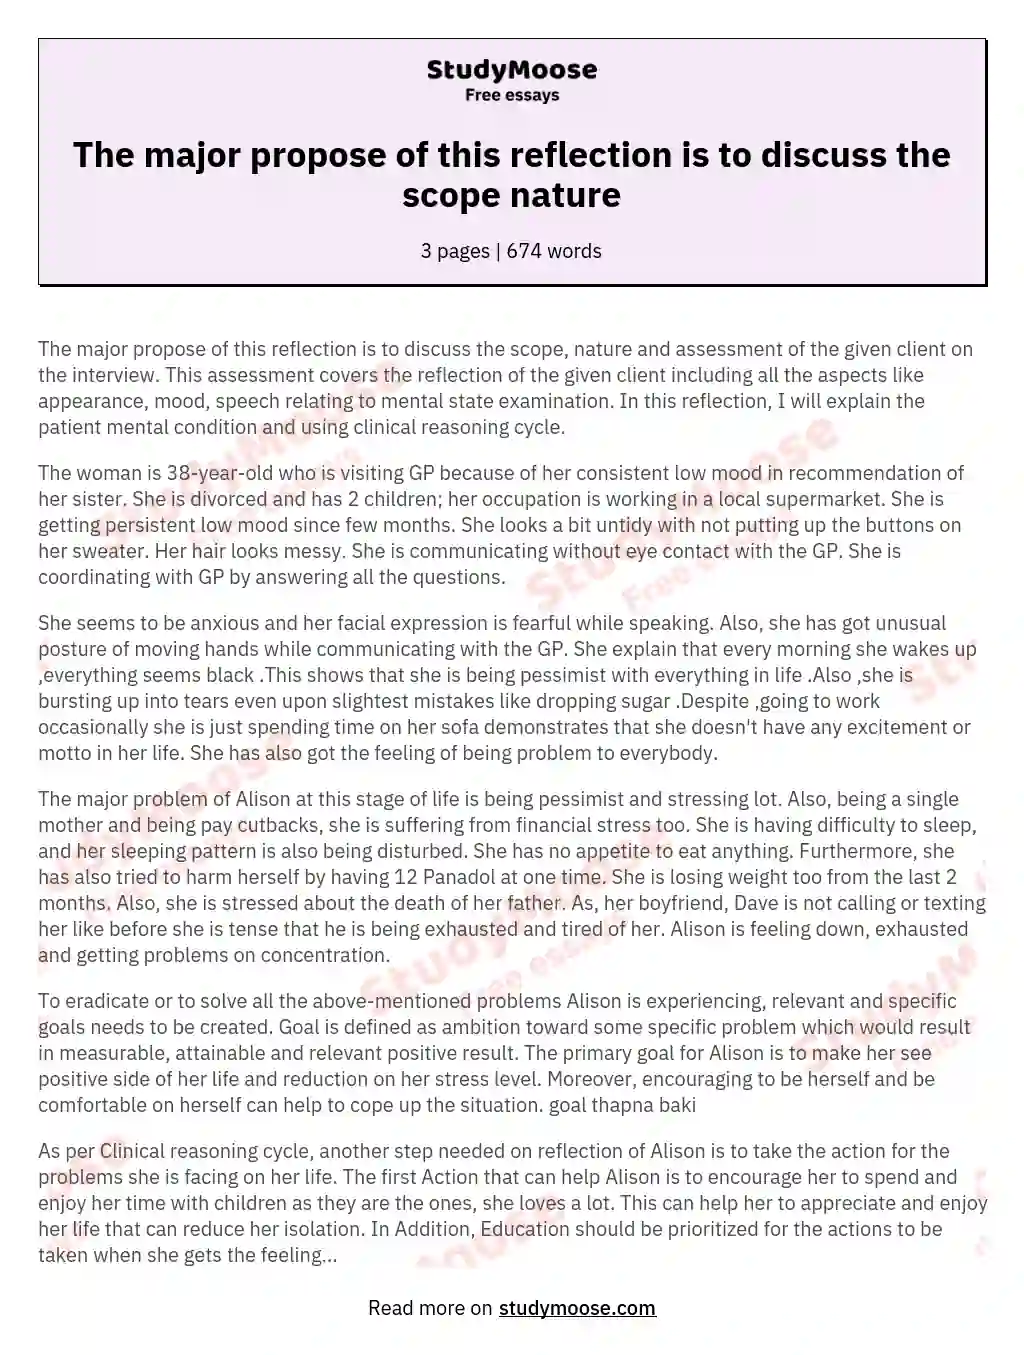 The major propose of this reflection is to discuss the scope nature essay